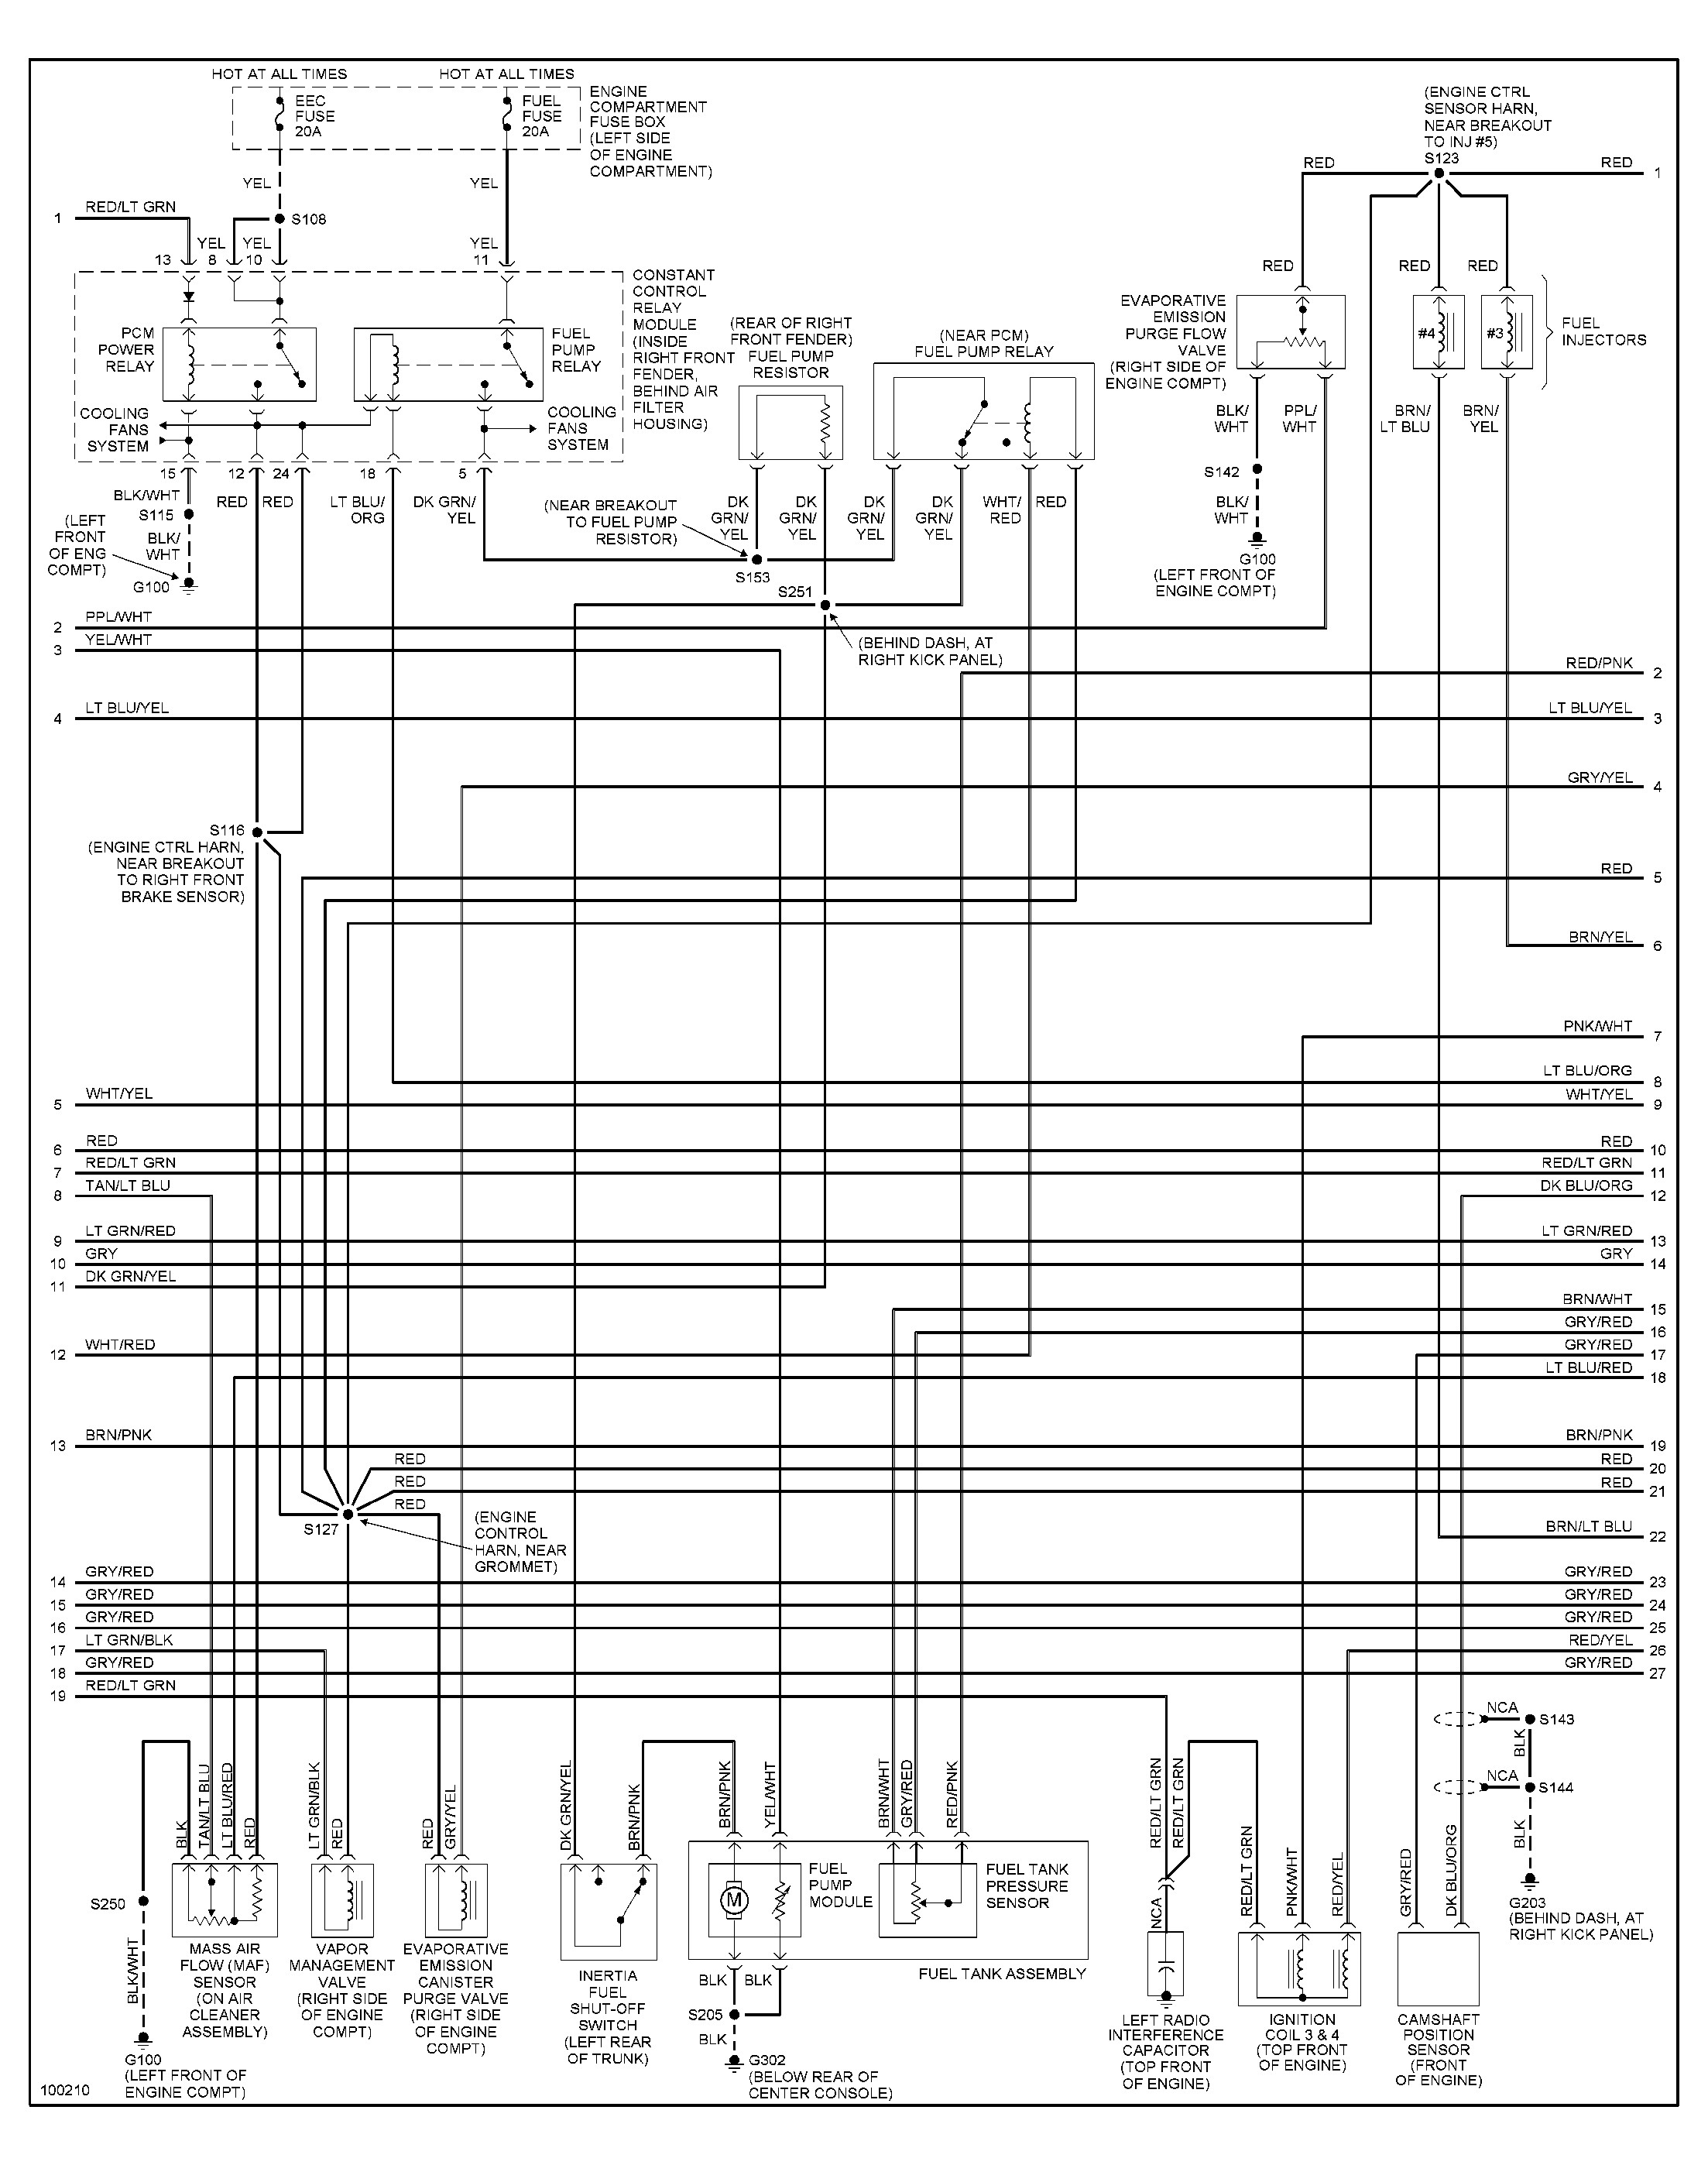 1998 ford Mustang Wiring Diagram to 2007 ford Mustang Wiring Diagram Wiring Diagram